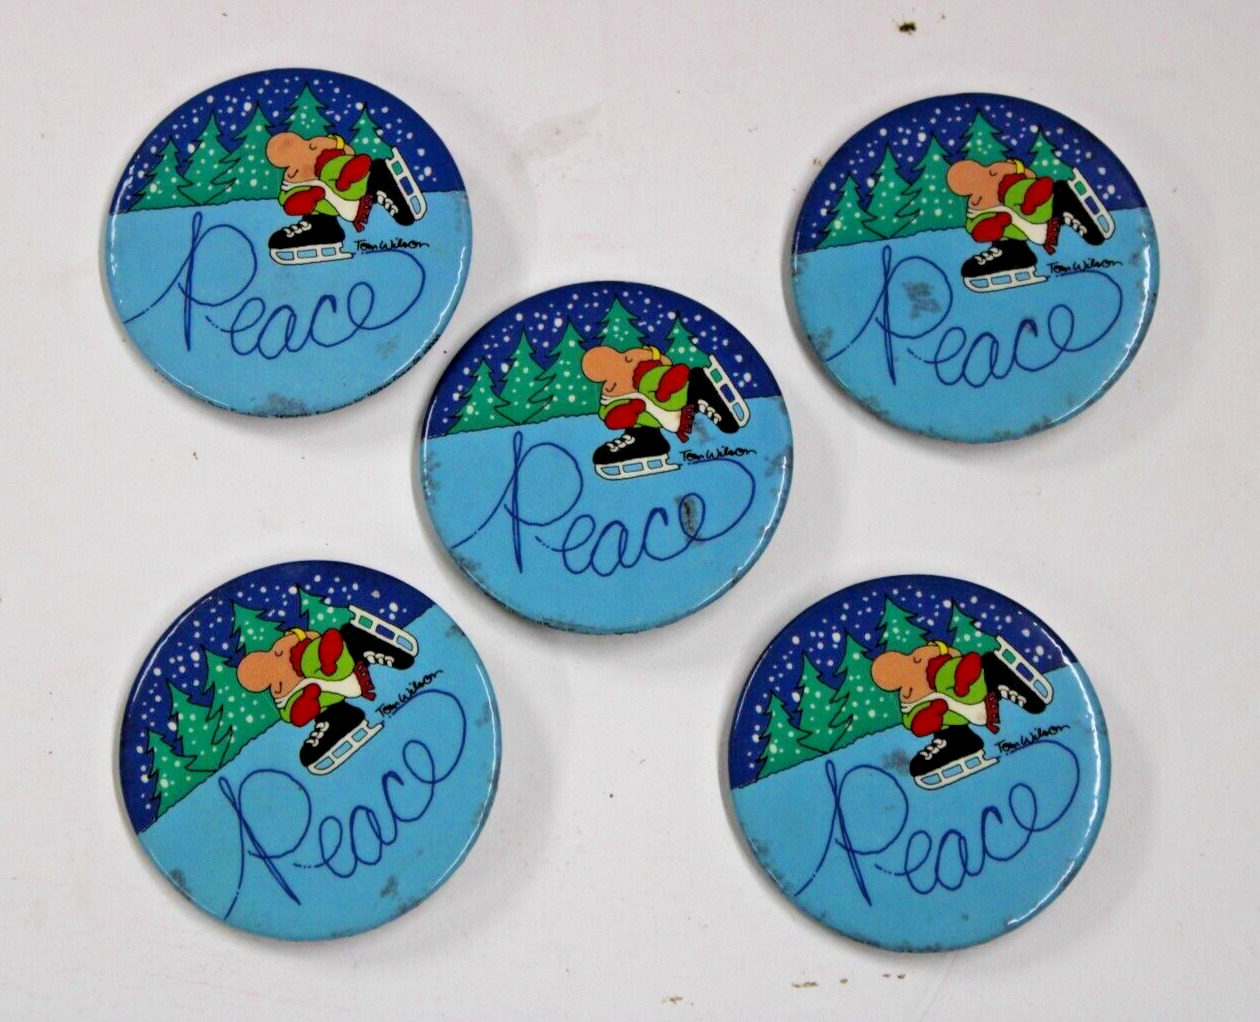 Lot of 5 Vintage 1980s ZIGGY Pin Back Buttons Peace Christmas Holiday